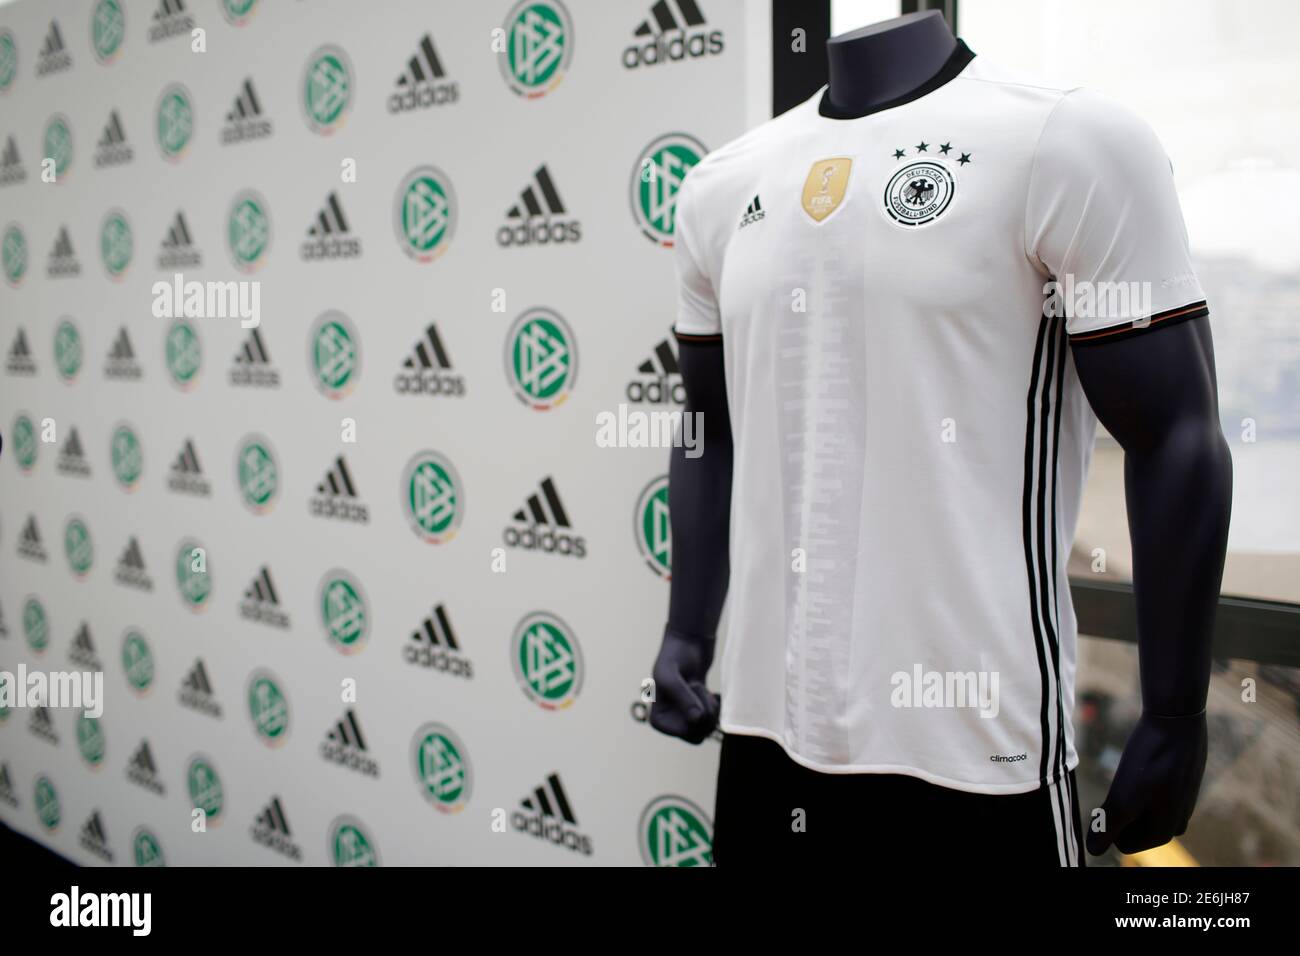 The Adidas soccer match jersey for the German national team is displayed  during a news conference by German Football Association (DFB) and sportswear  company Adidas in Paris, France, June 20, 2016. REUTERS/Stephane